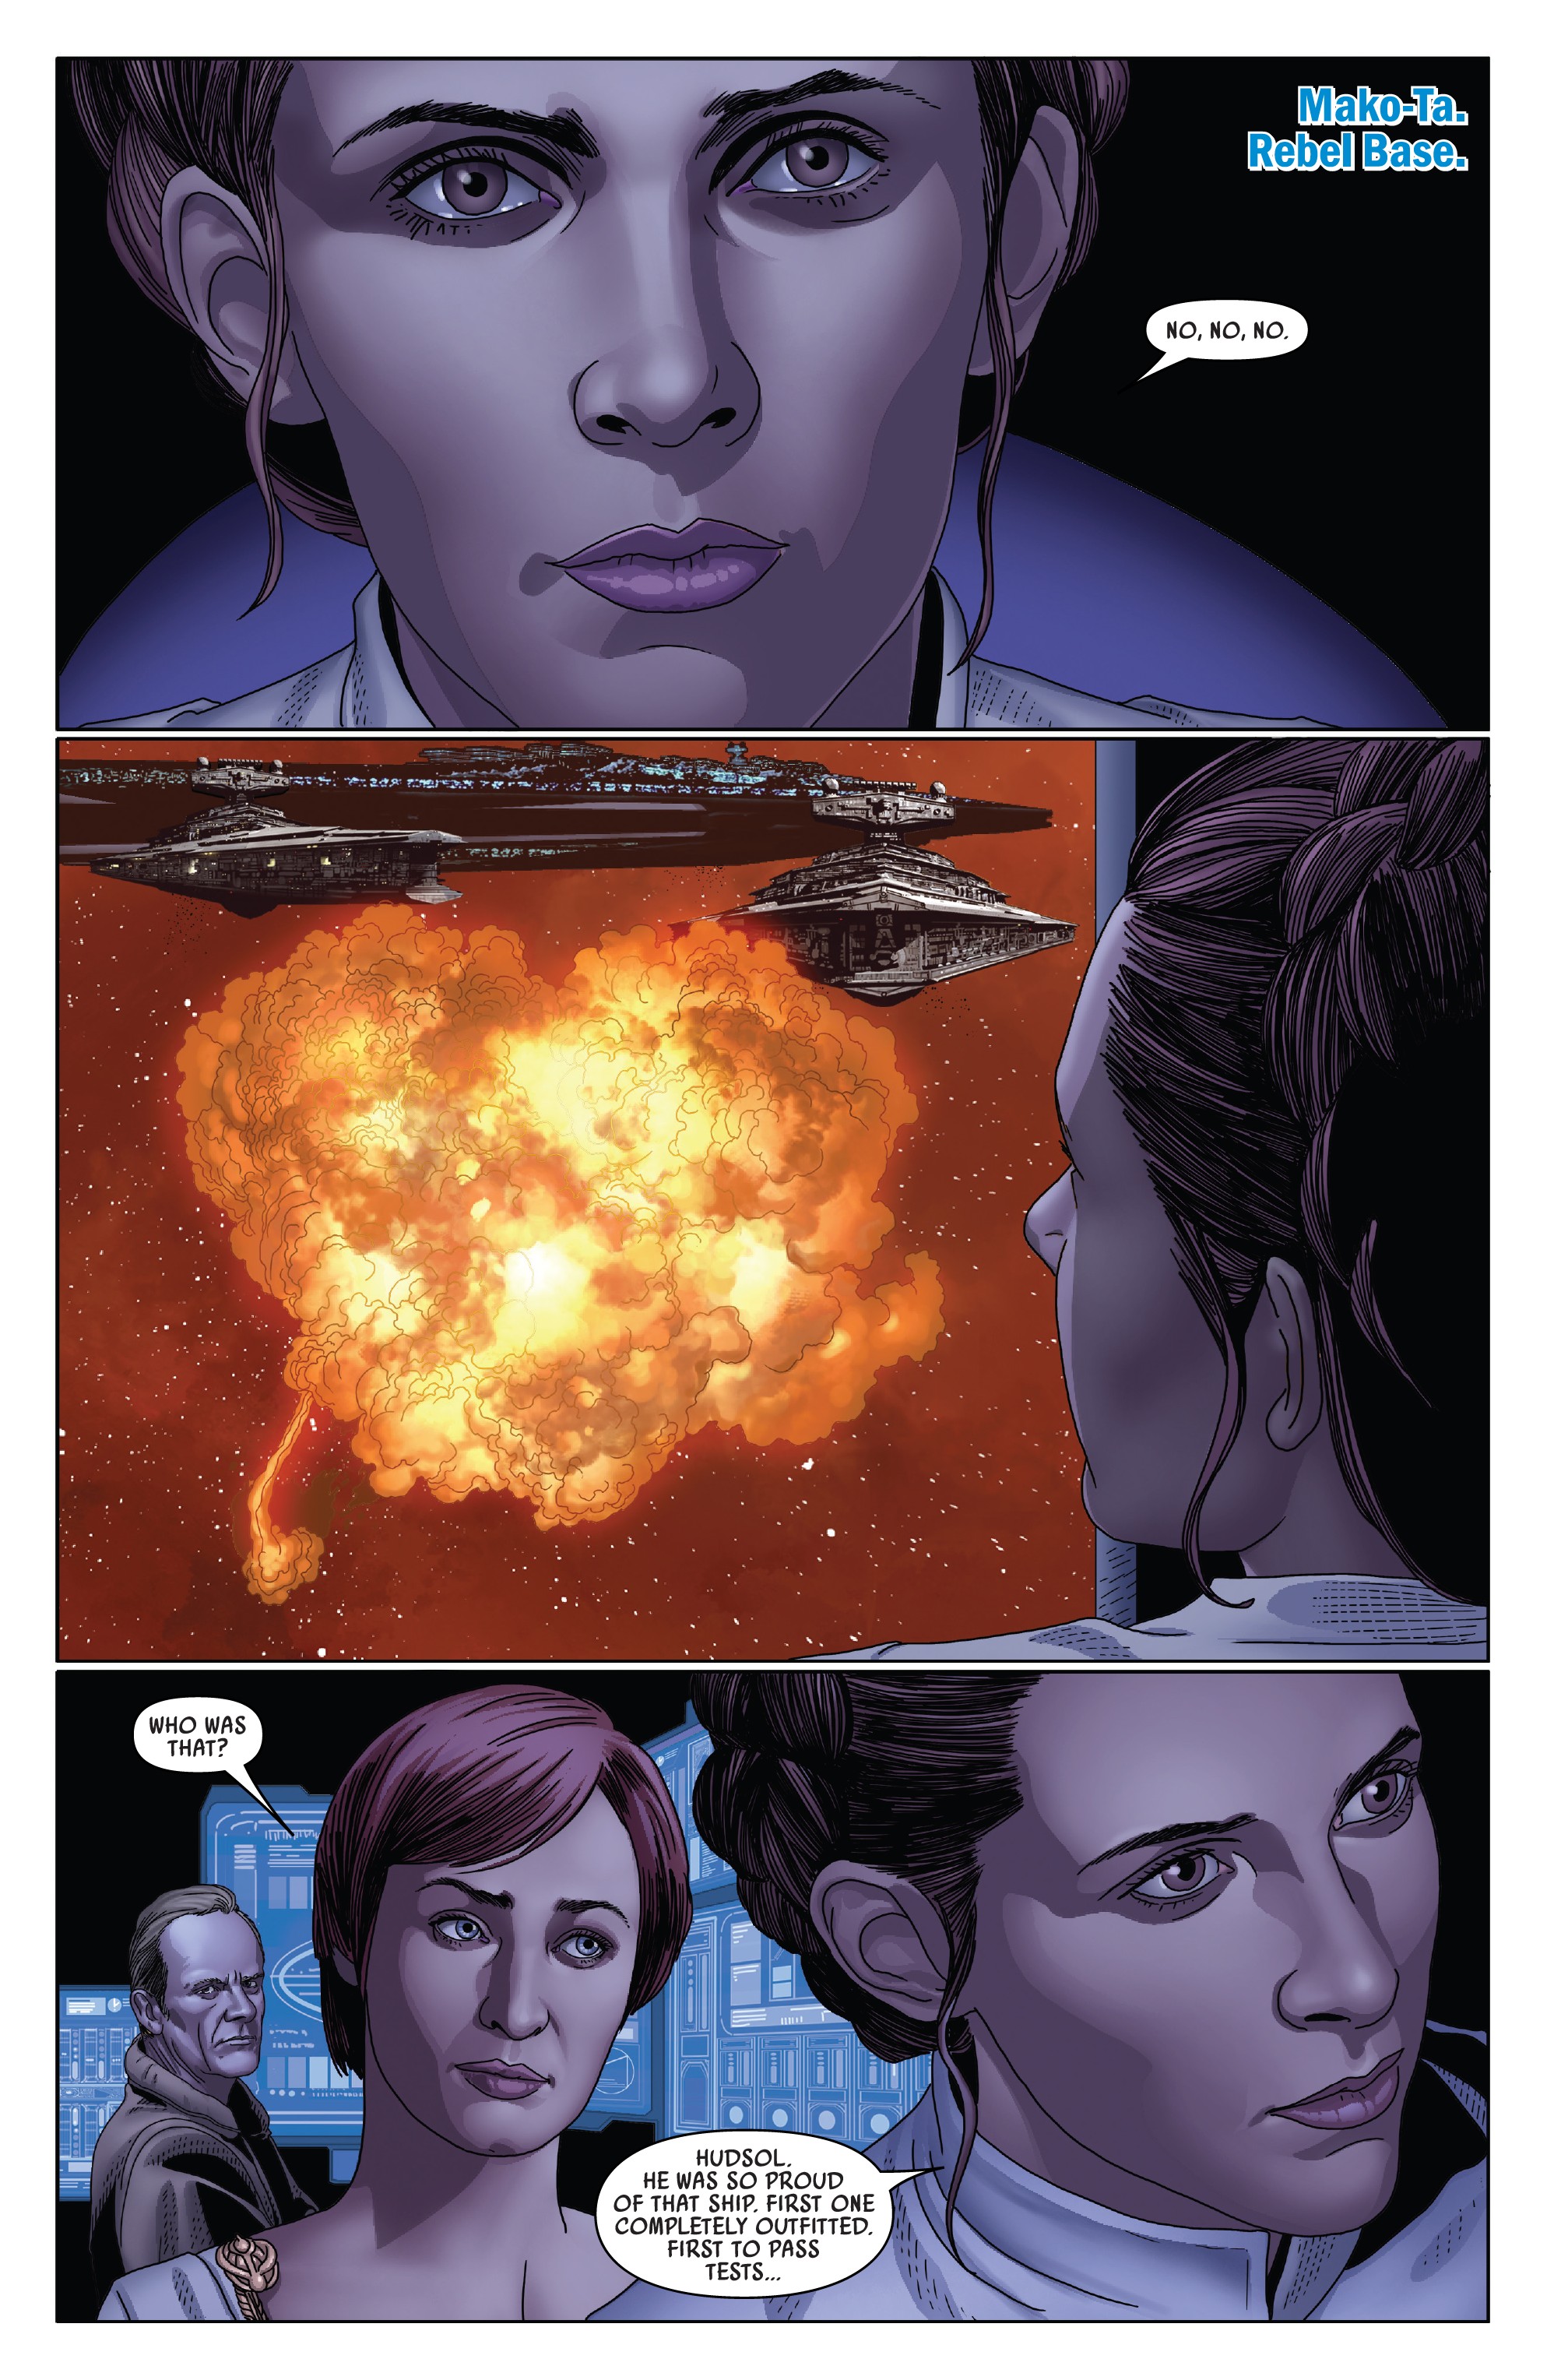 Star Wars (2015-): Chapter 53 - Page 3